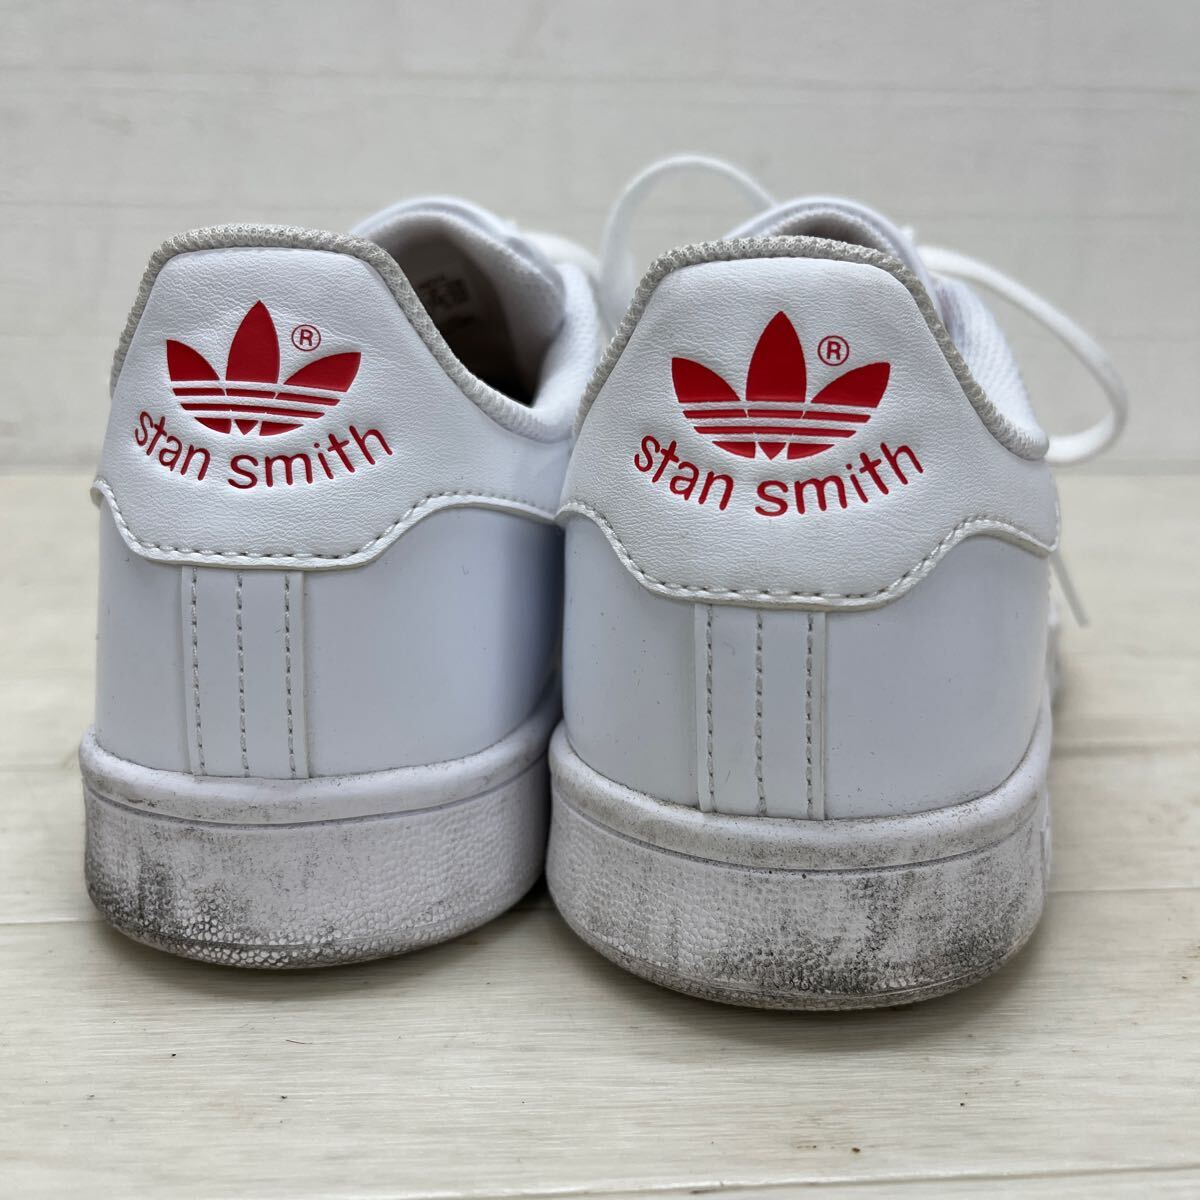  peace 267*② adidas STAN SMITH Adidas Stansmith sneakers shoes Heart 24.5 lady's white red 